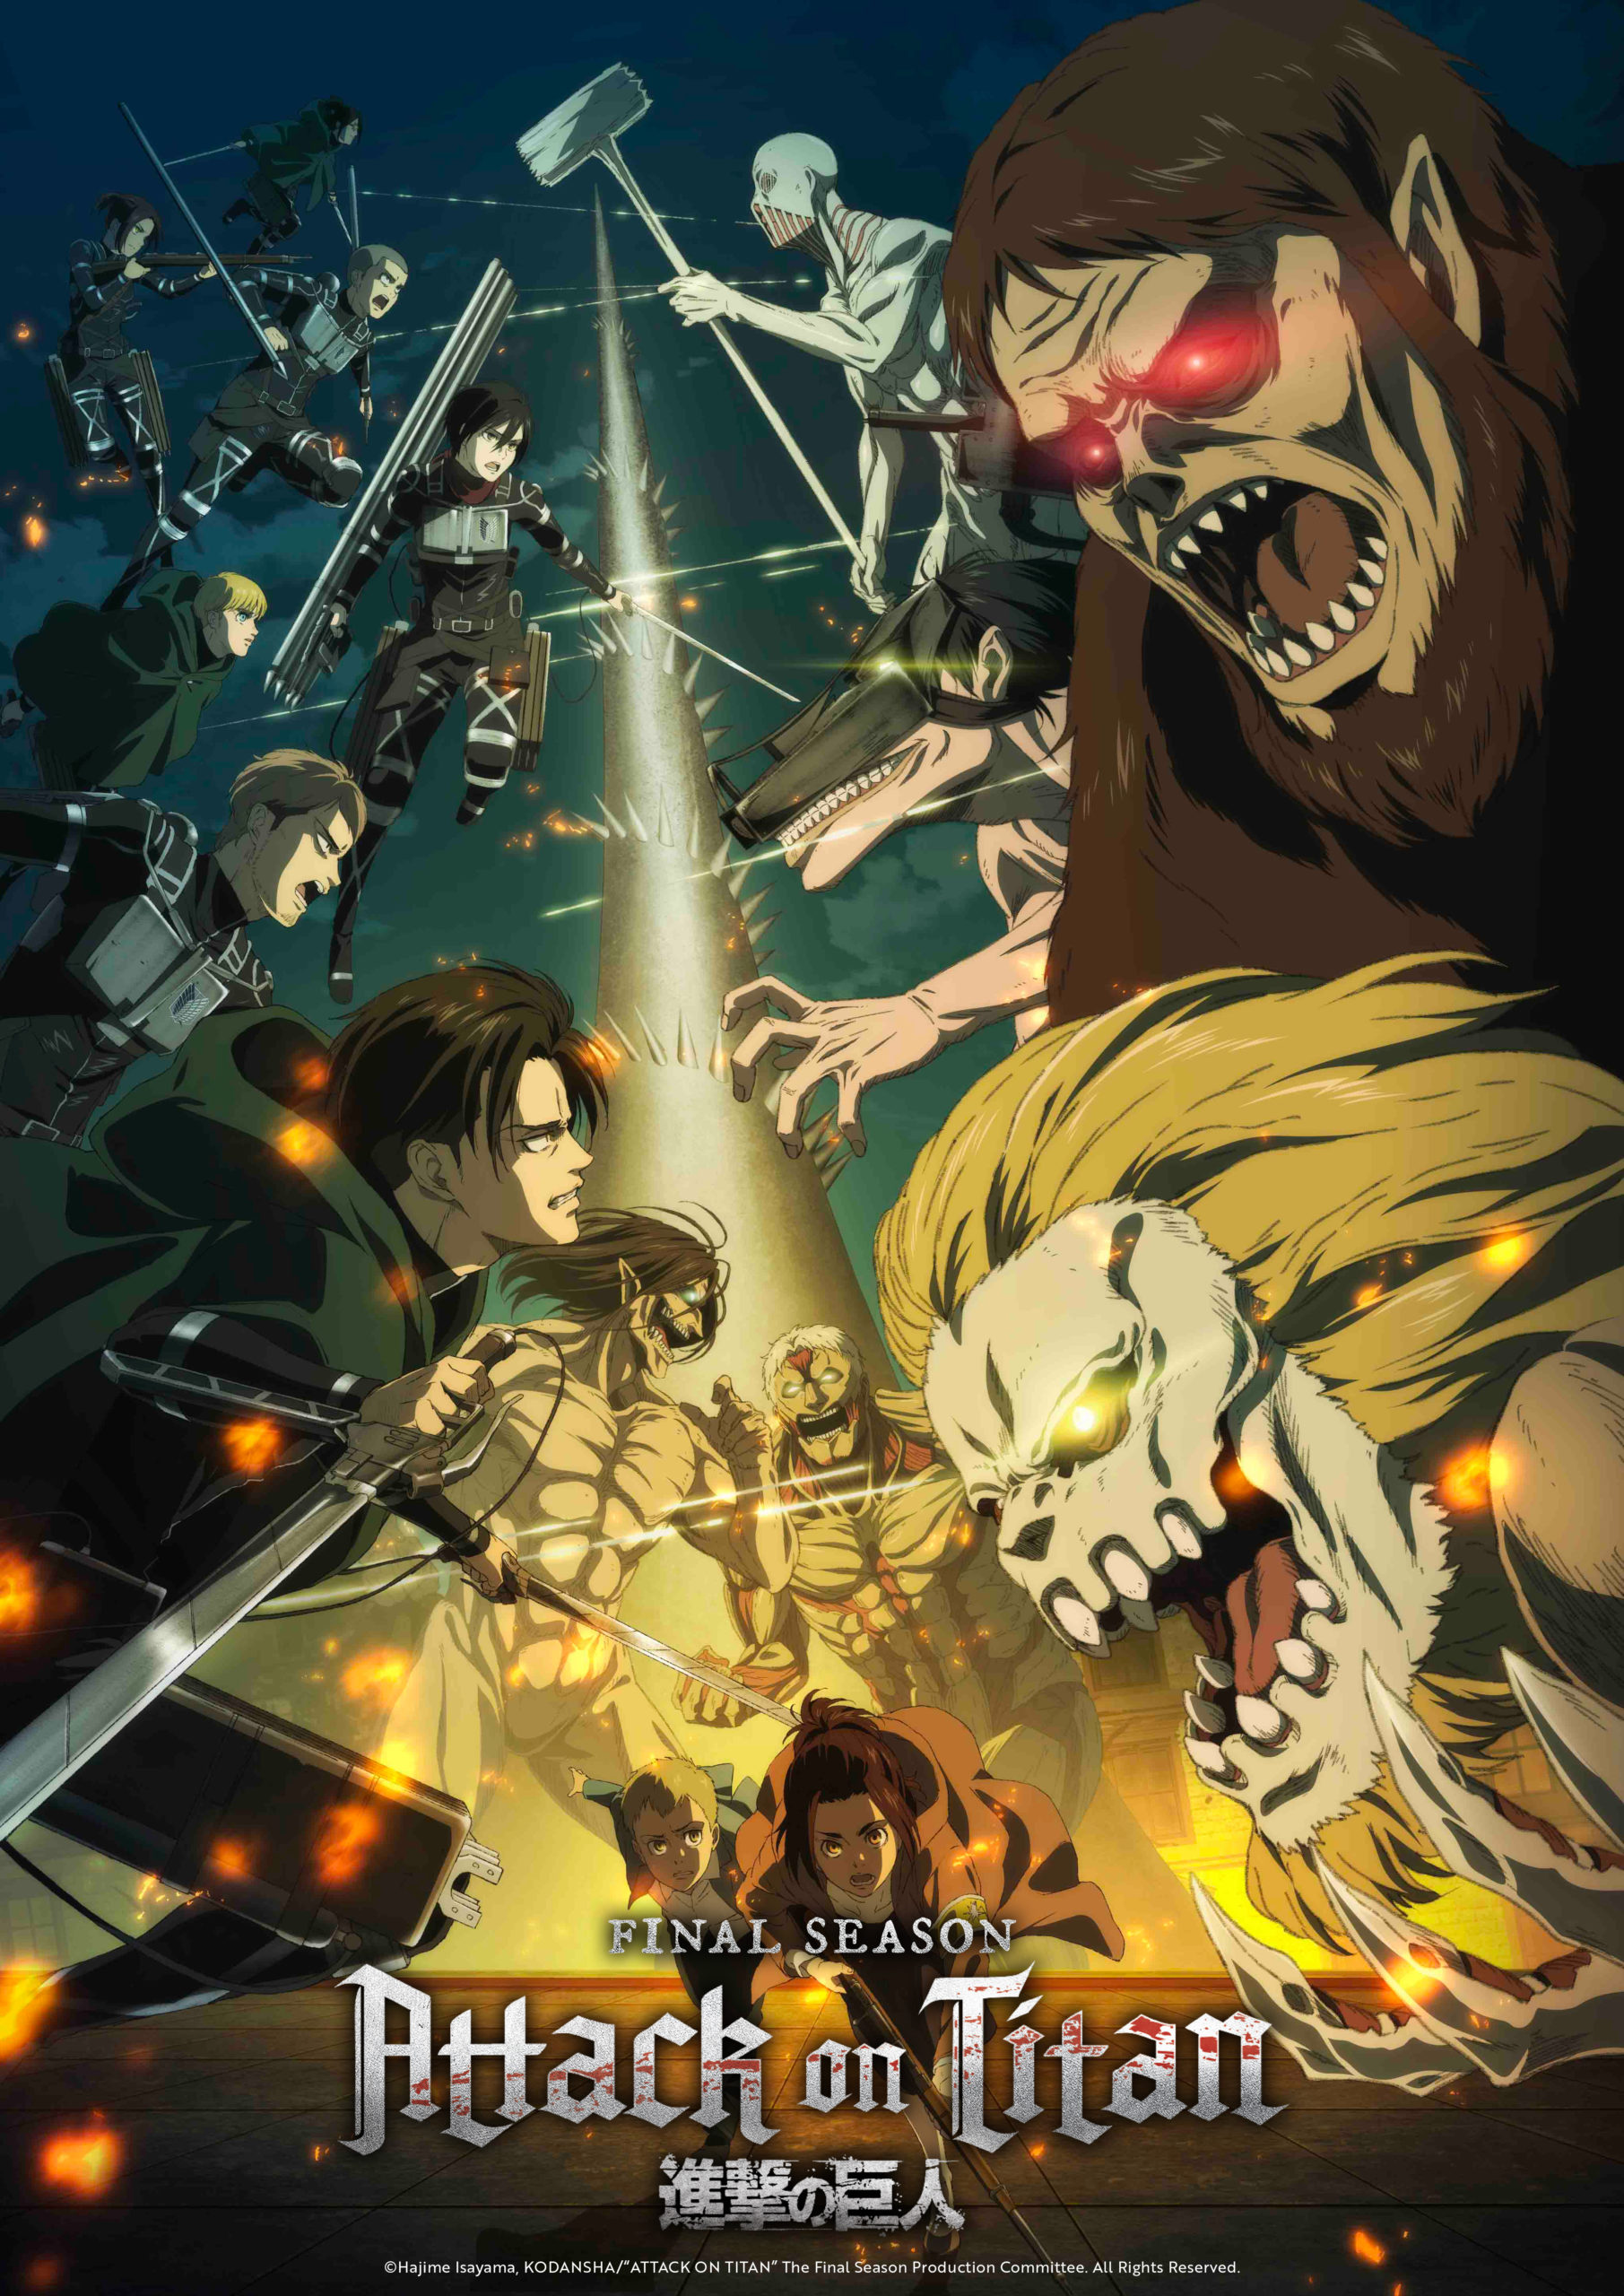 Attack On Titan S4 Part 2 English Simuldub Confirmed This Month